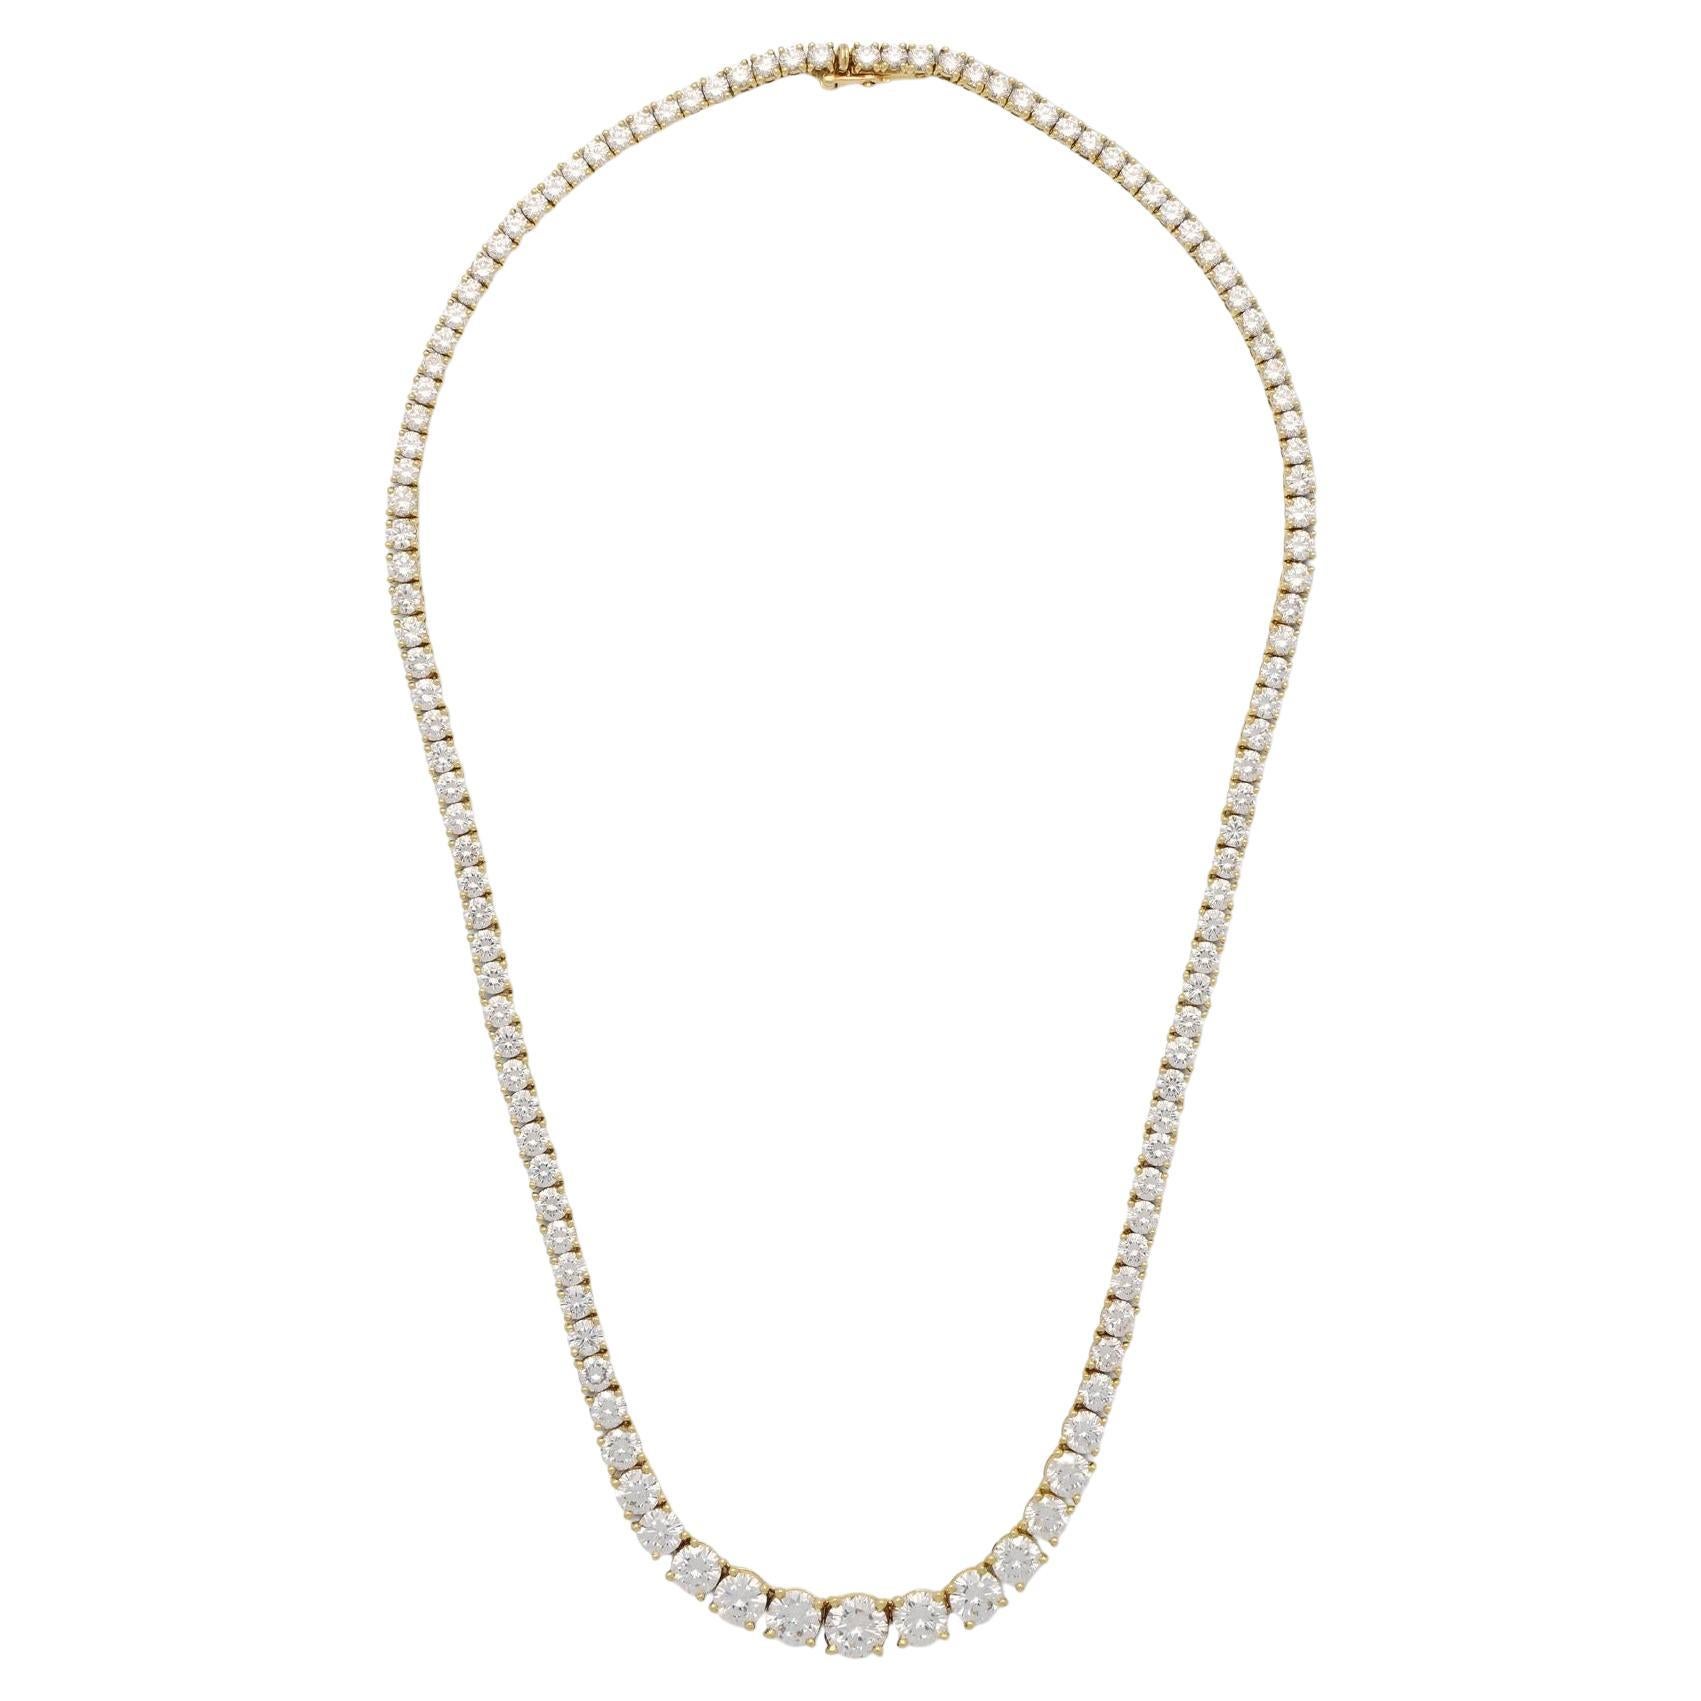 Cartier 18ct Yellow Gold And Round Brilliant Diamond 'Tennis' Line Necklace